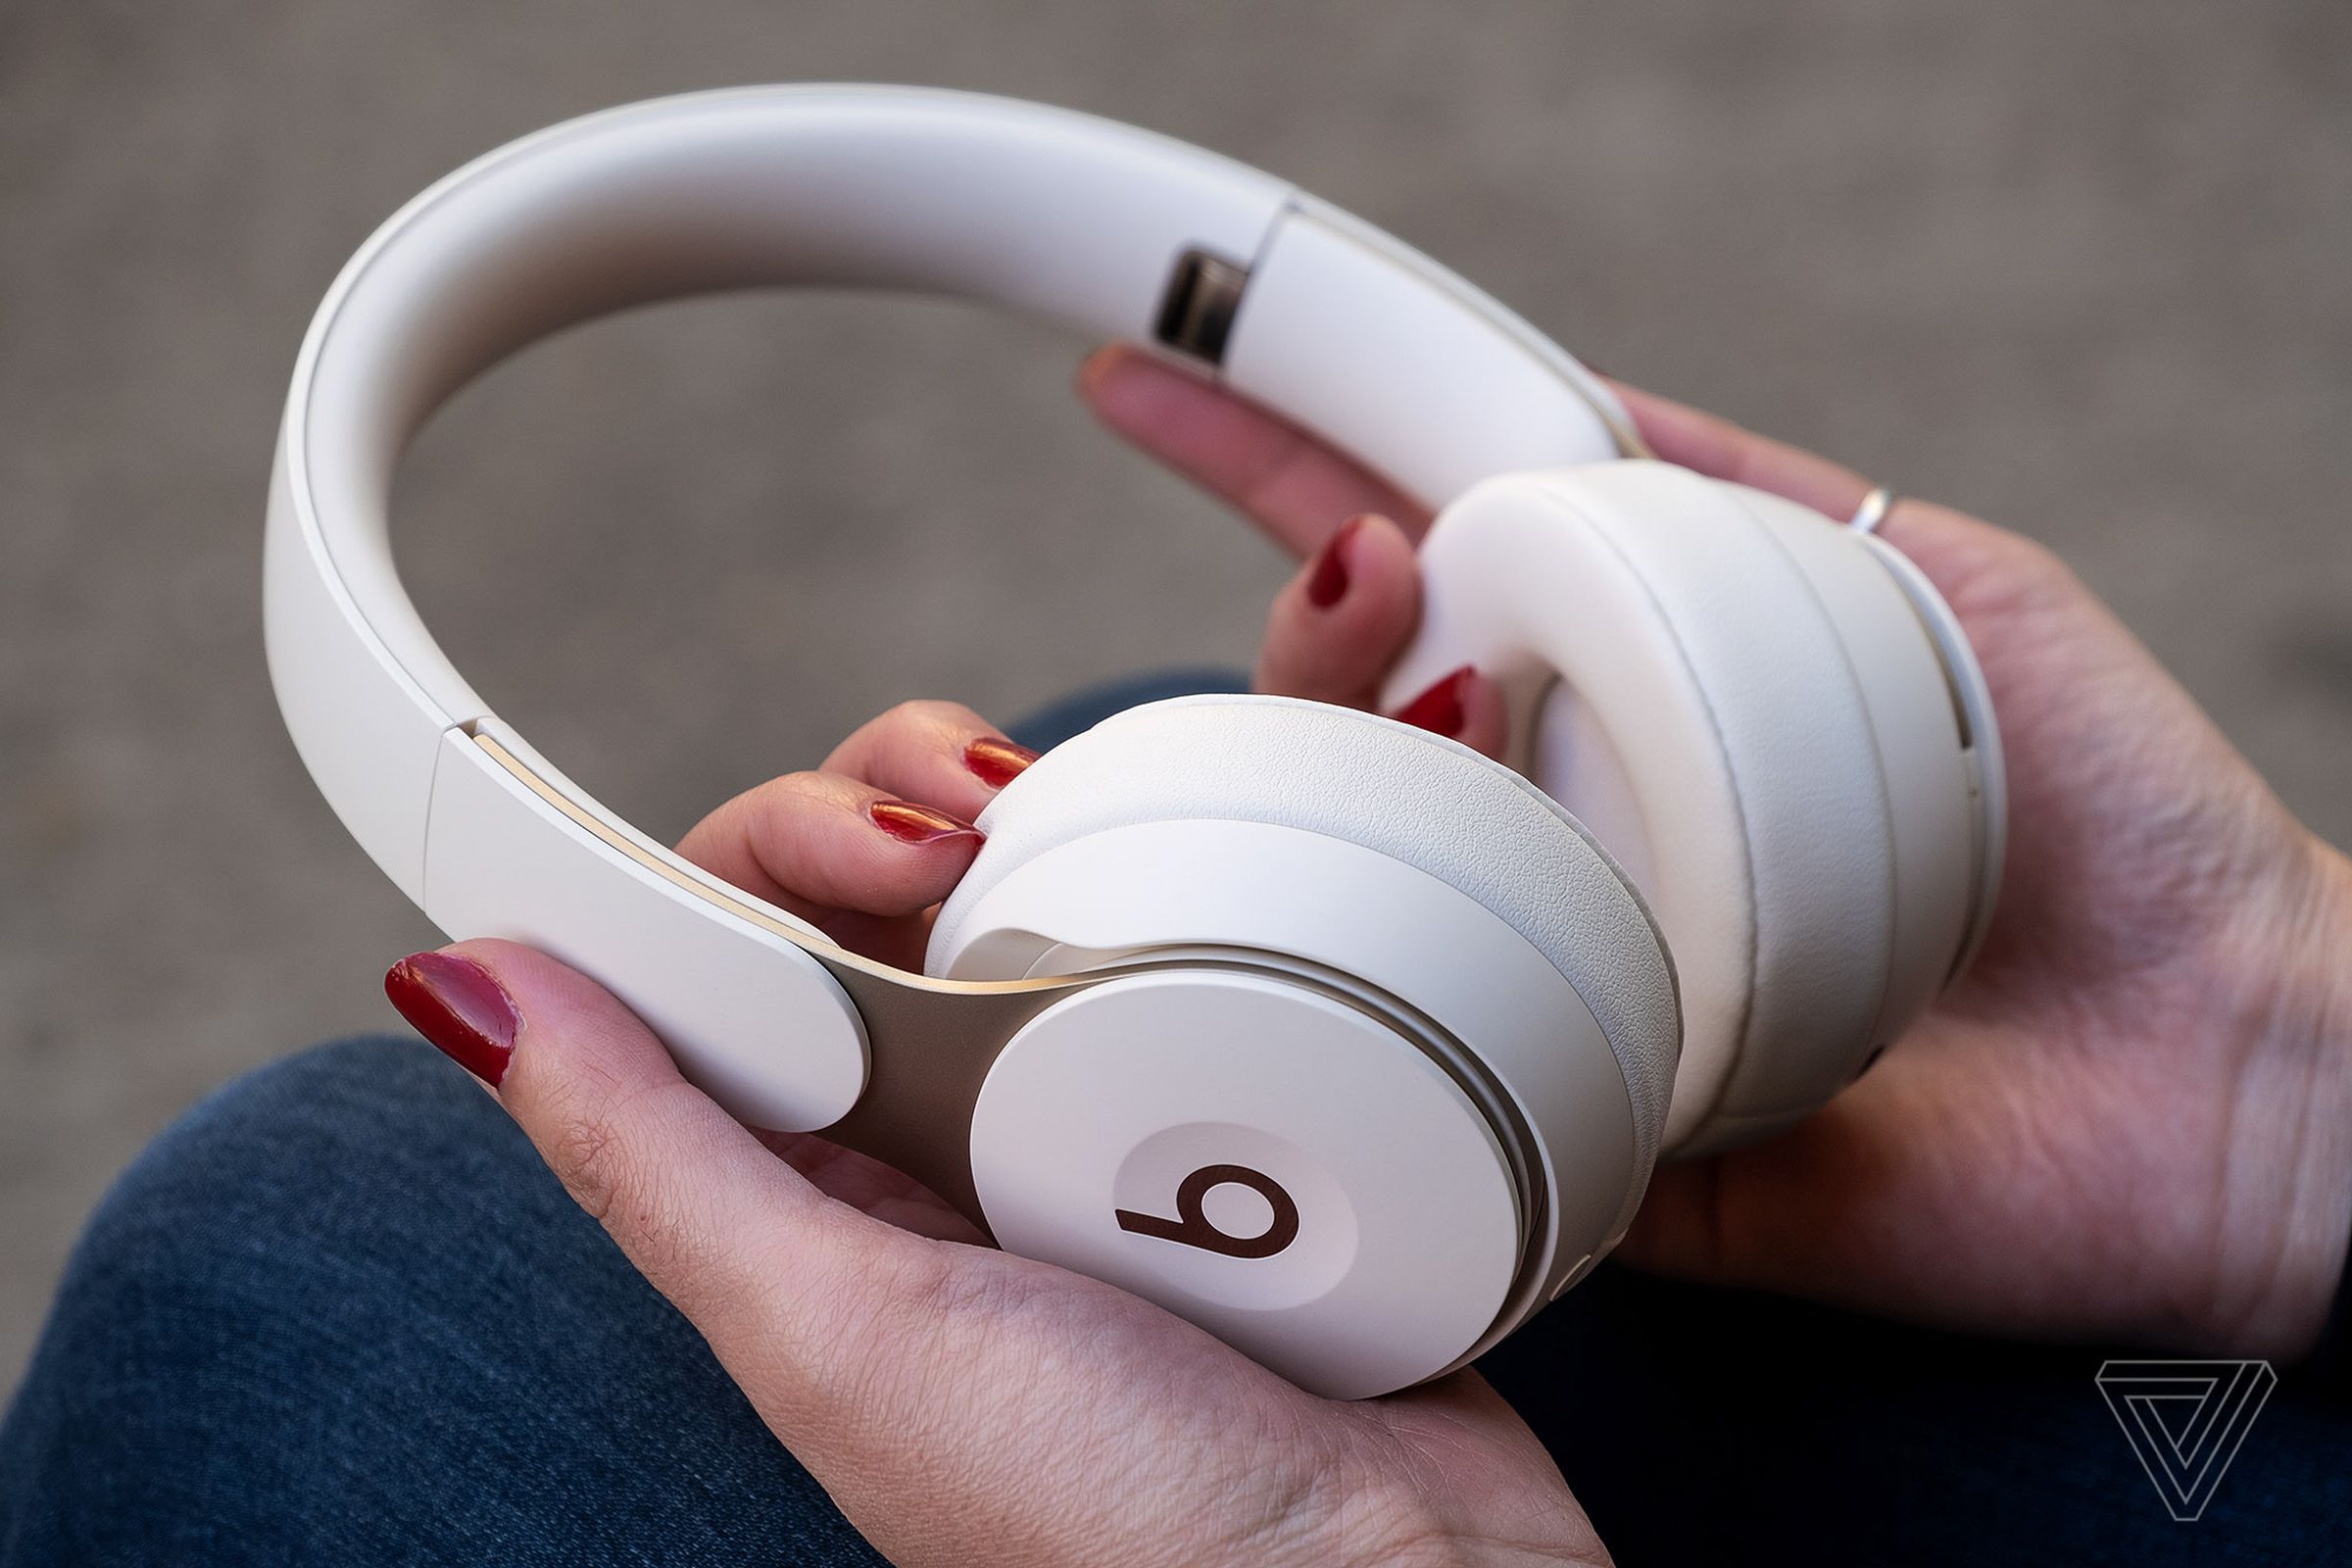 The Beats Solo Pro come in six colors